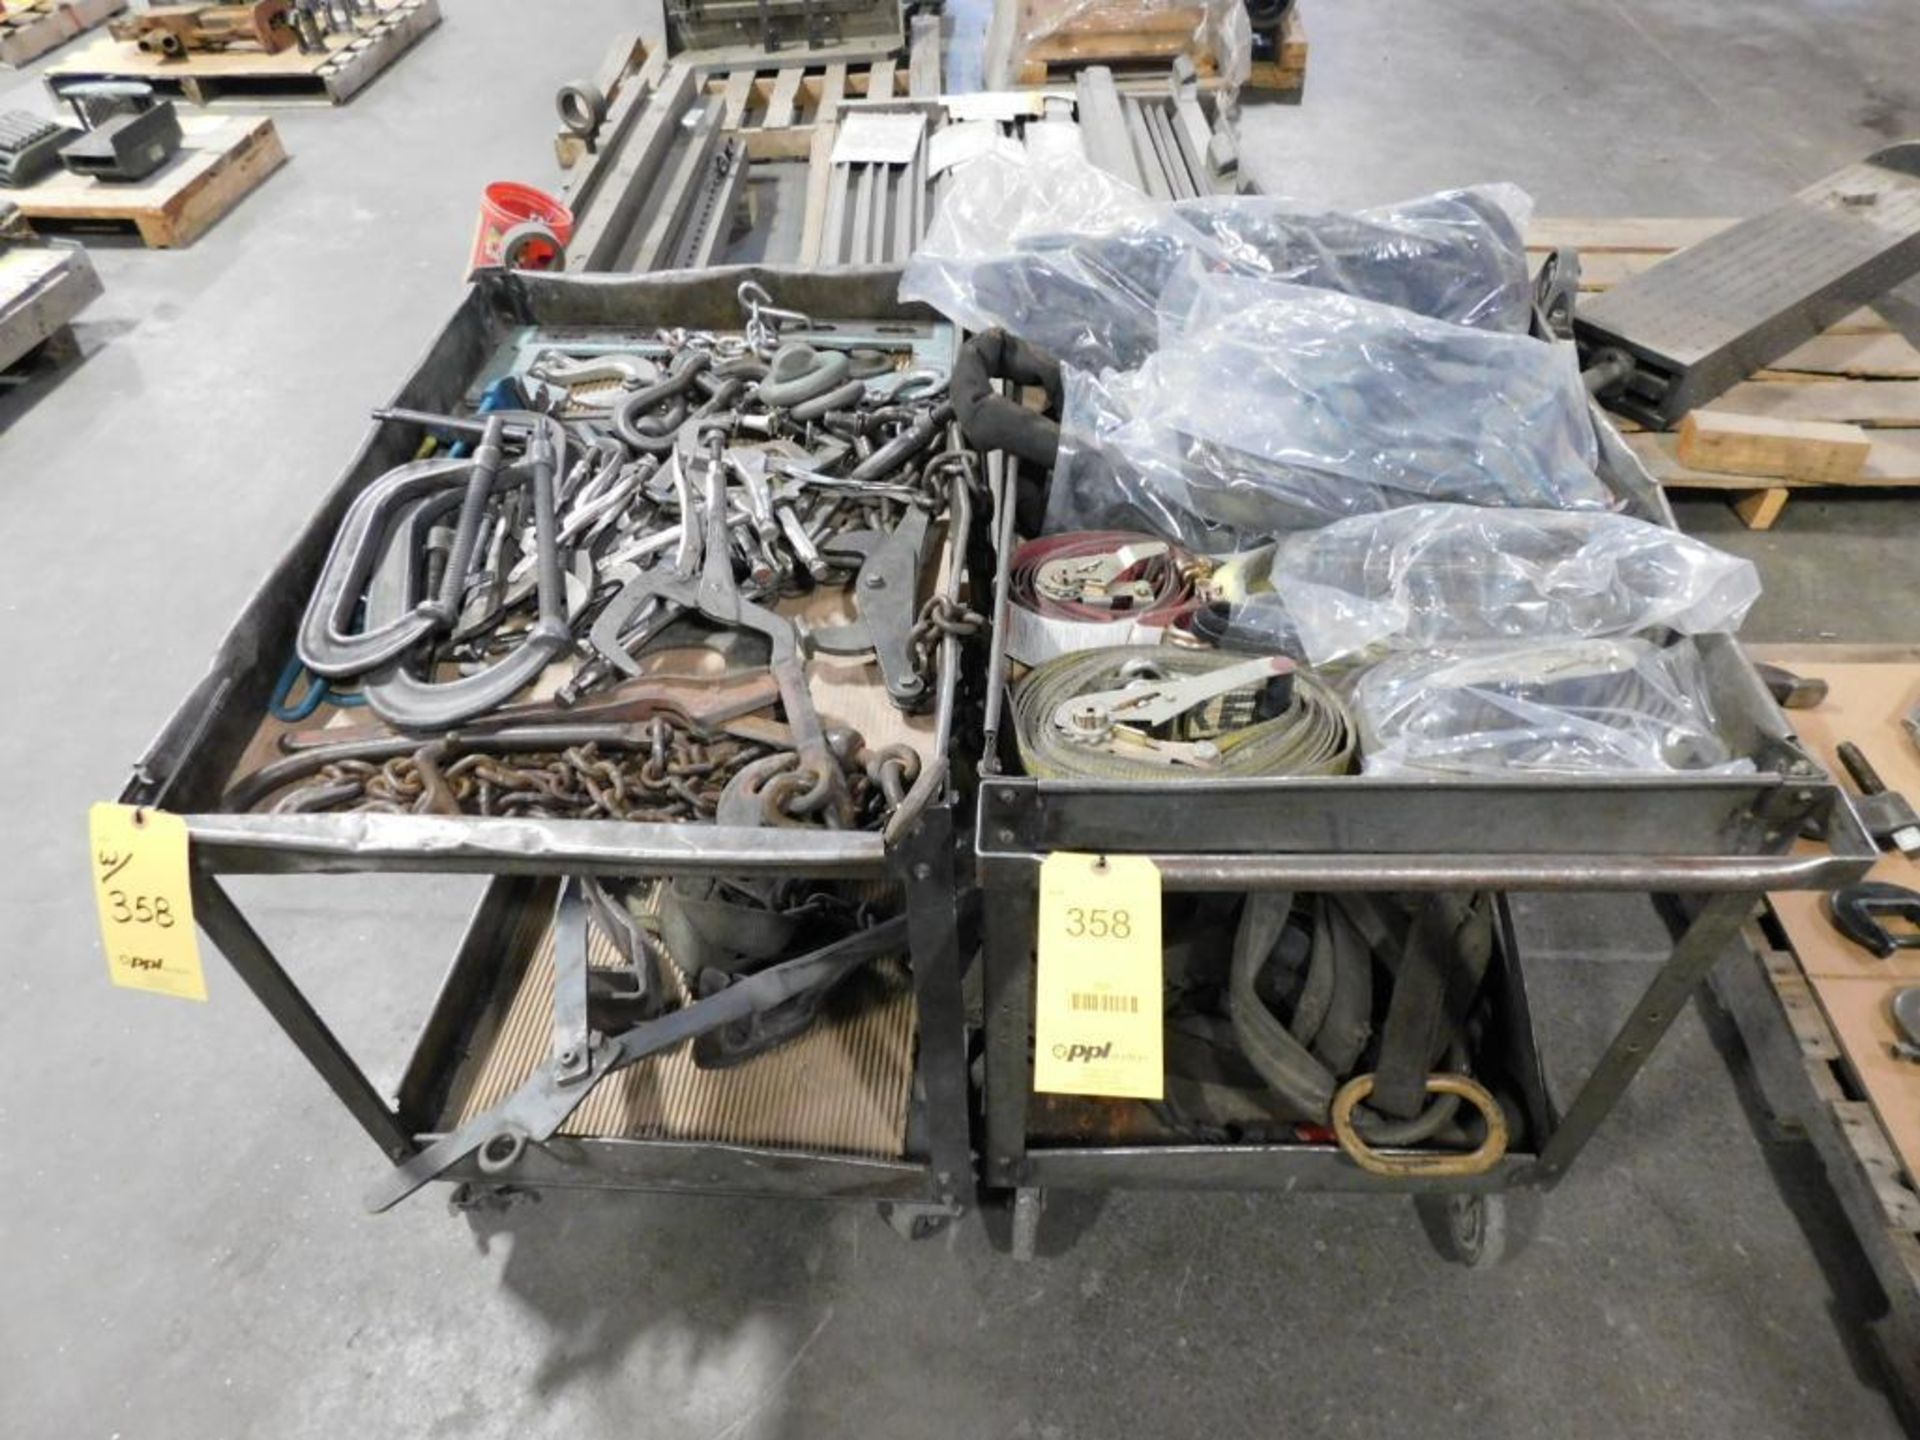 LOT: (2) Carts w/Assorted Lifting Equipment, Clamps, Pliers, Used Straps & Lifting Slips